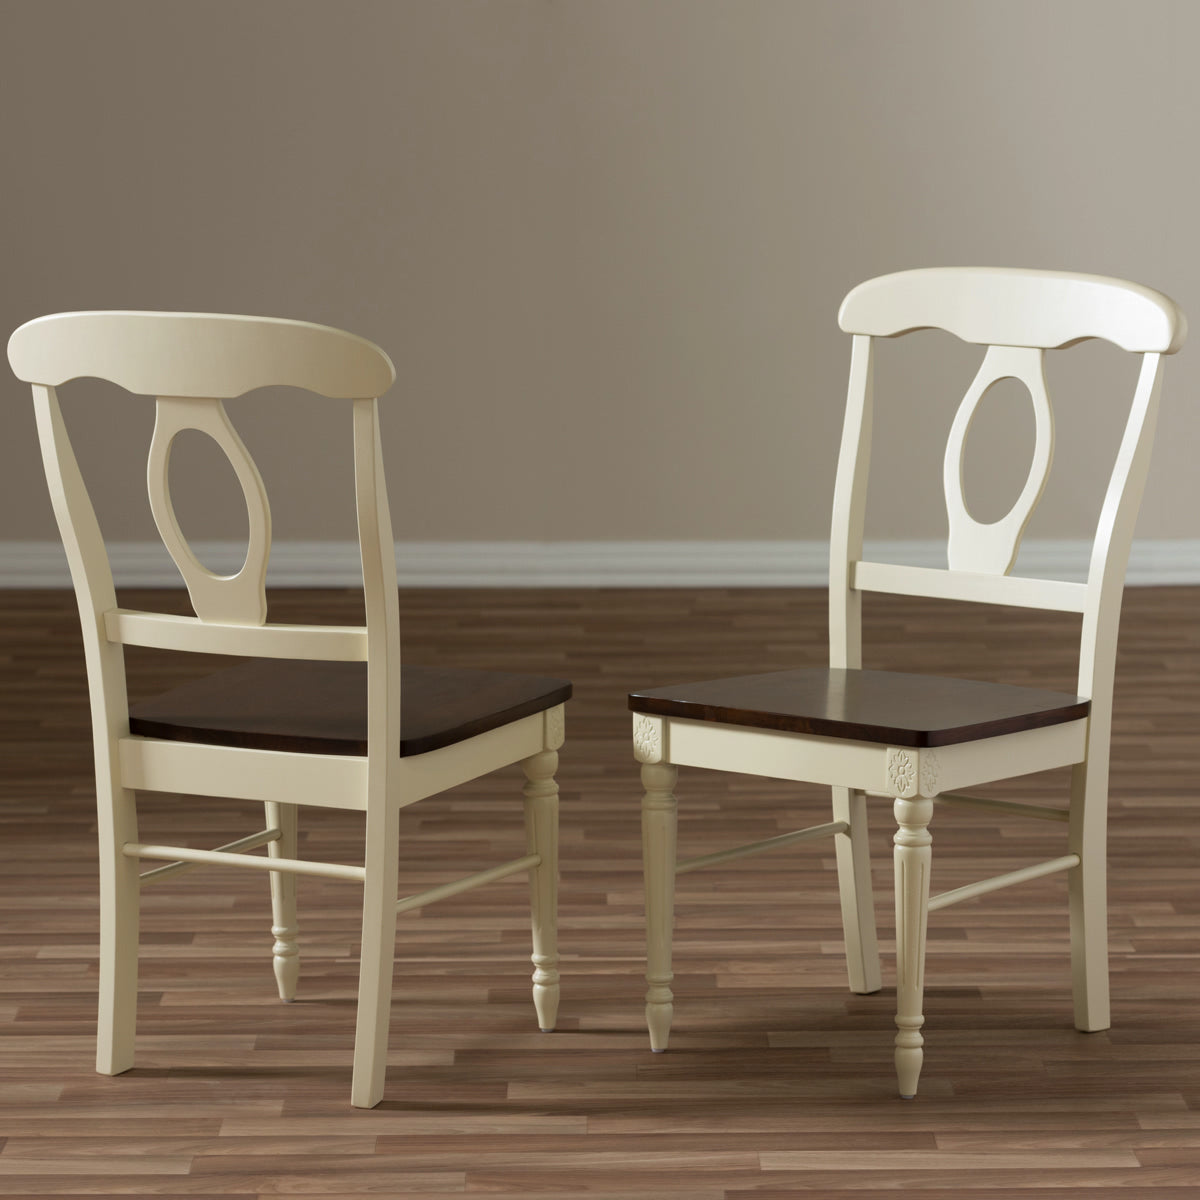 Baxton Studio Napoleon French Country Cottage Buttermilk and "Cherry" Brown Finishing Wood Dining Chair Baxton Studio-dining chair-Minimal And Modern - 5